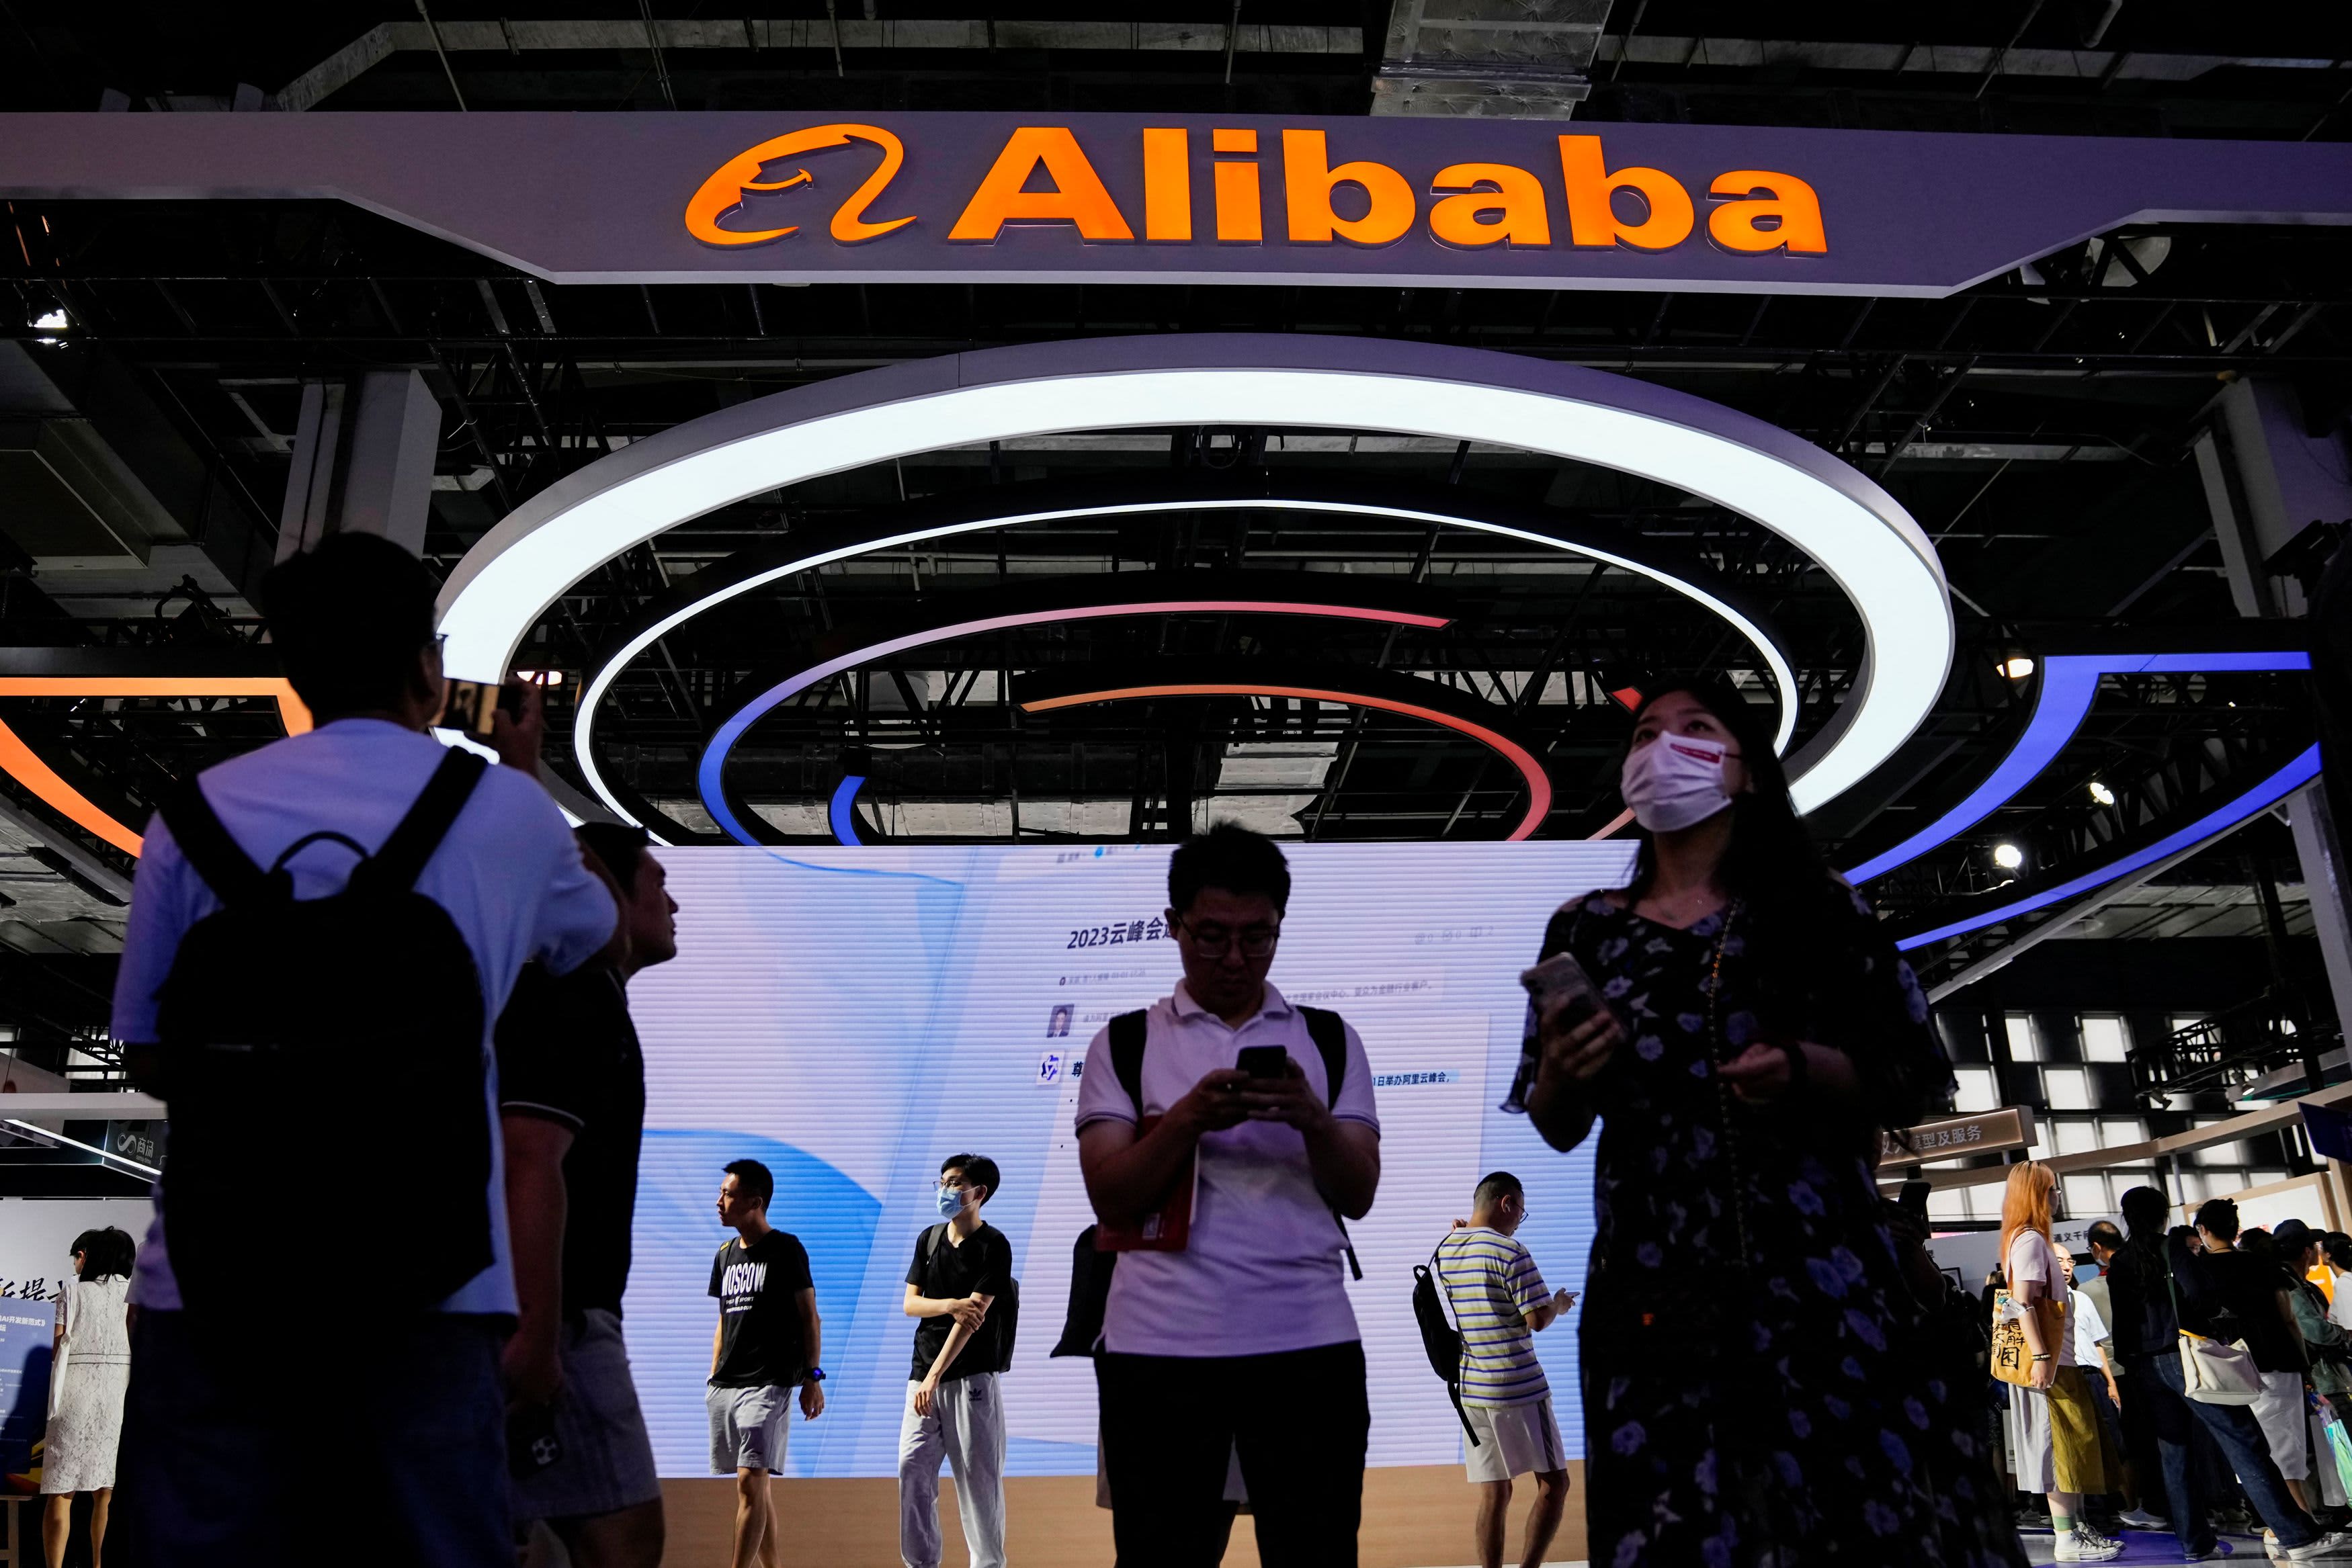 Alibaba is planning an initial public offering for its logistics unit Cainiao